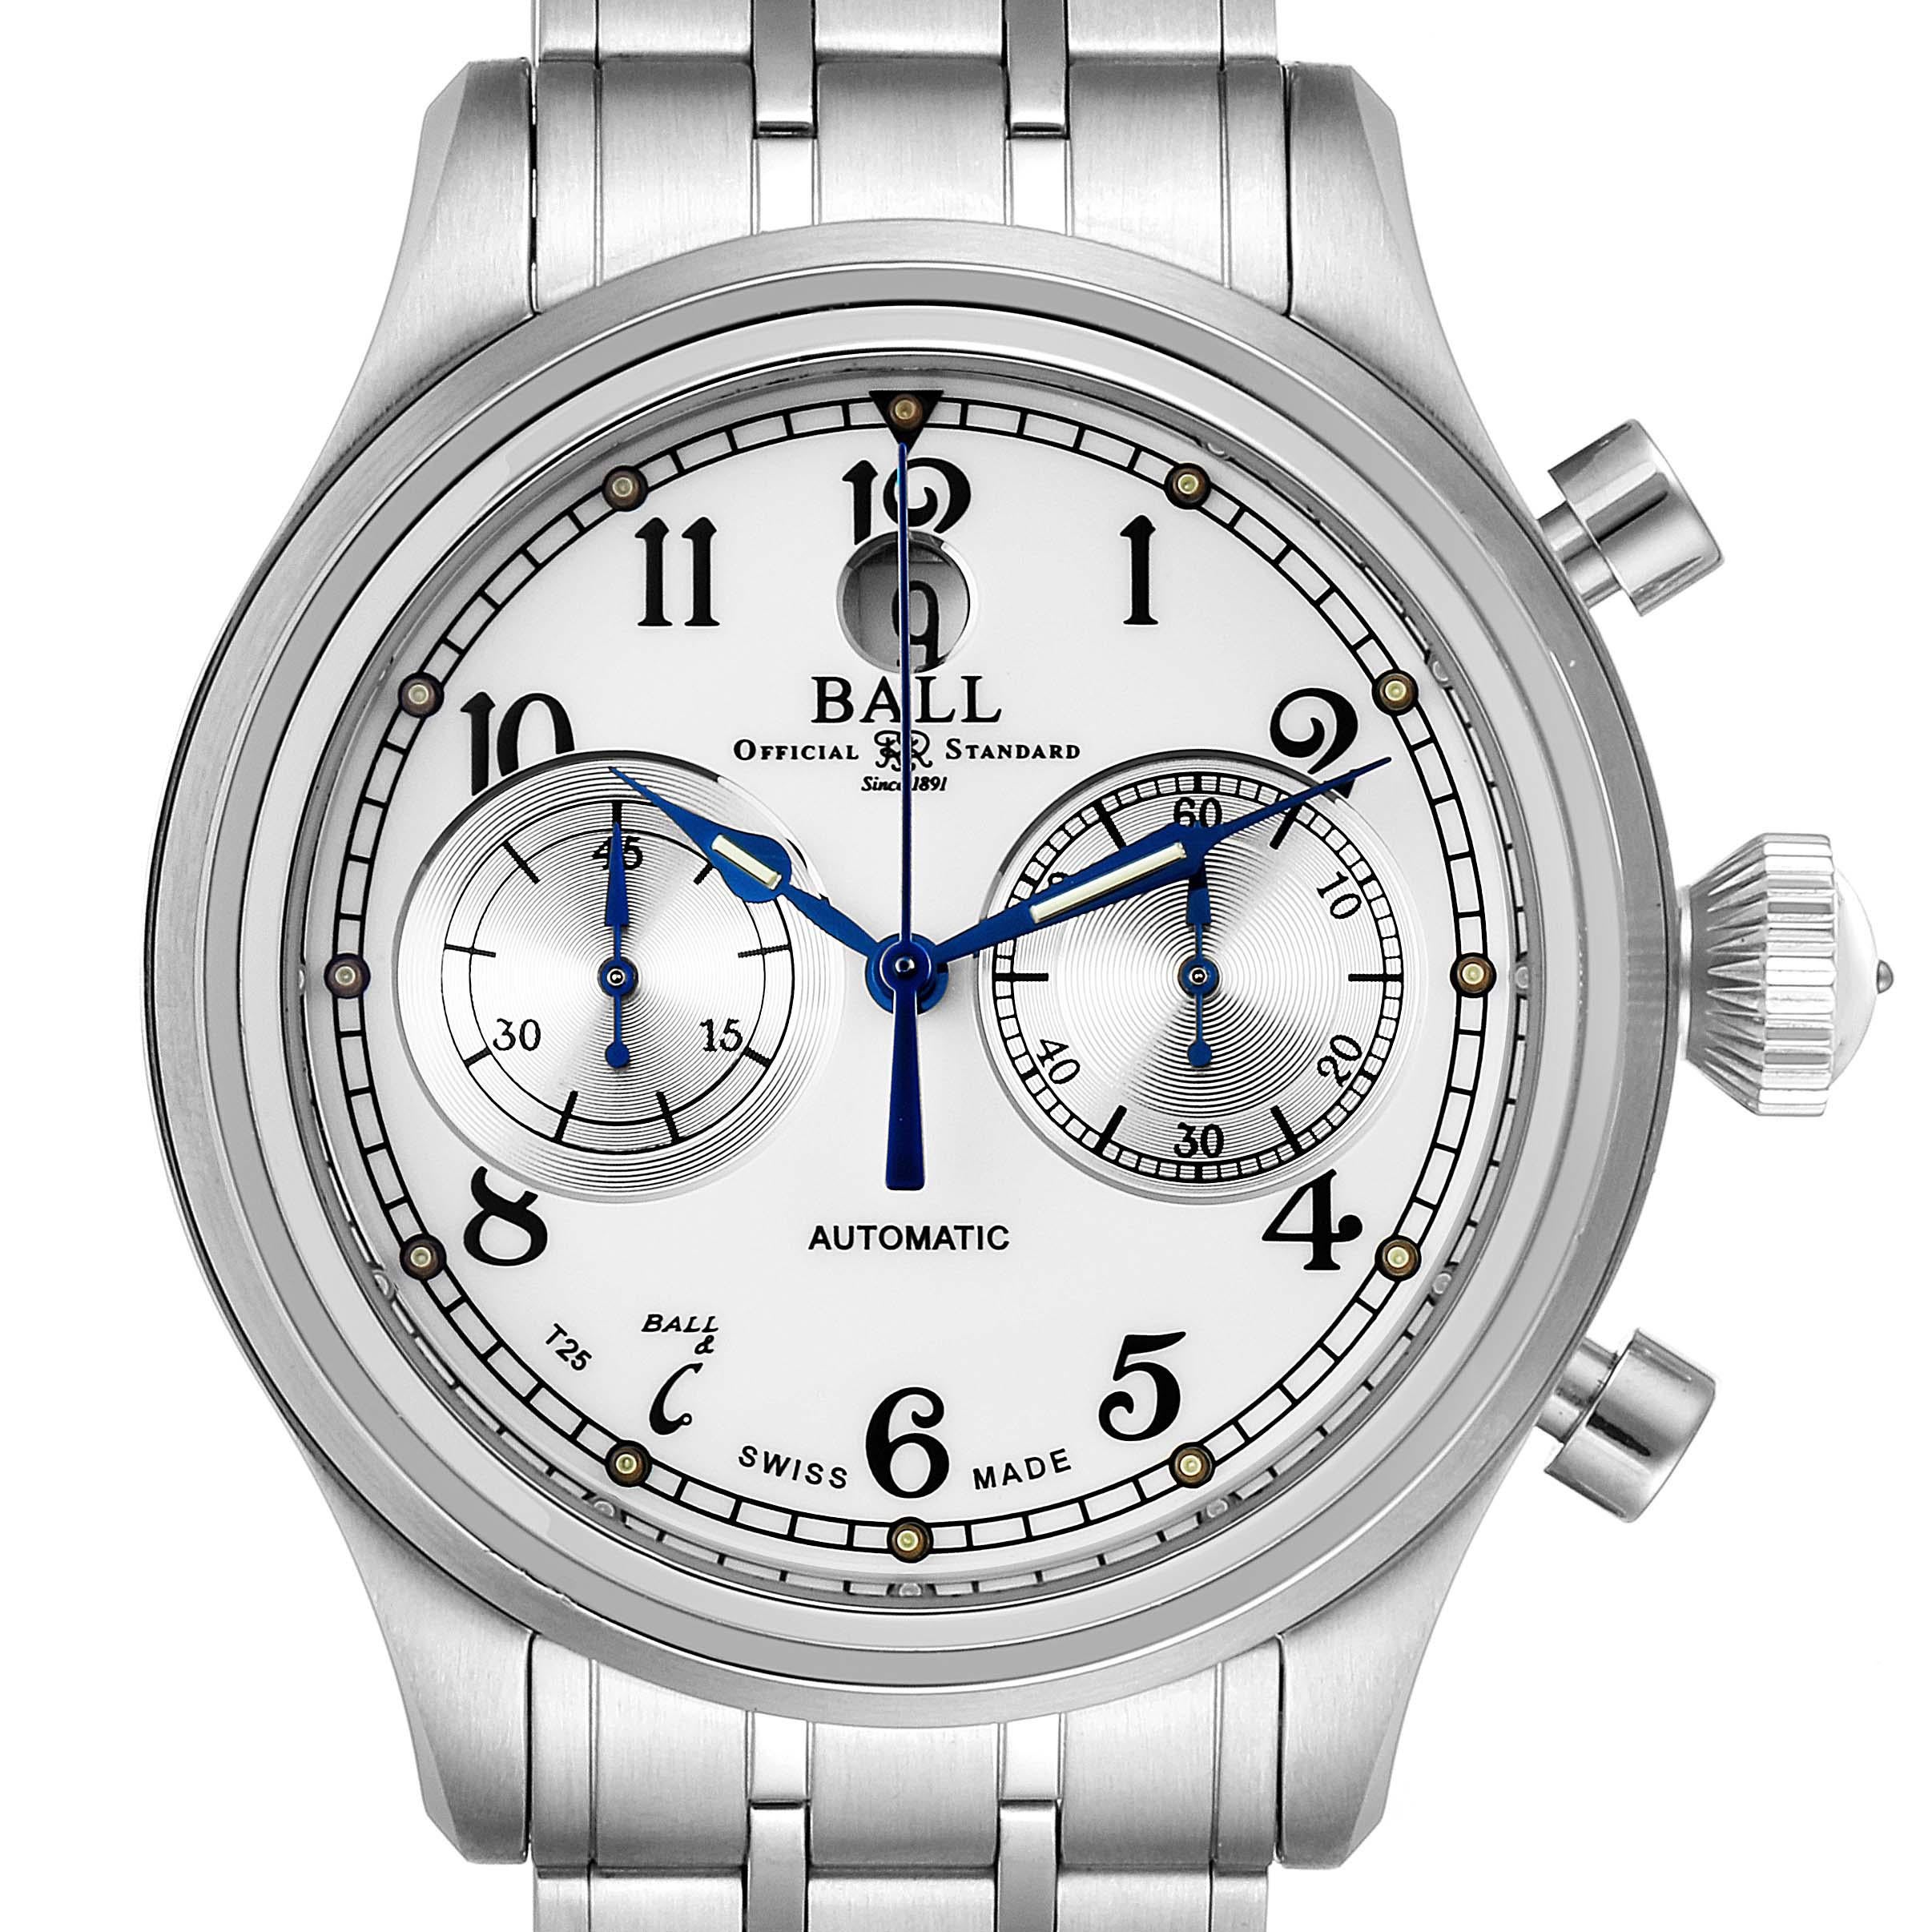 Ball Trainmaster Cannonball Chronograph Steel Mens Watch CM1052D Card. Automatic self-winding chronograph movement. Anti-shock springlock system. Stainless steel case 43.0 mm in diameter. Exhibition transparrent sapphire crystal case back. Stainless